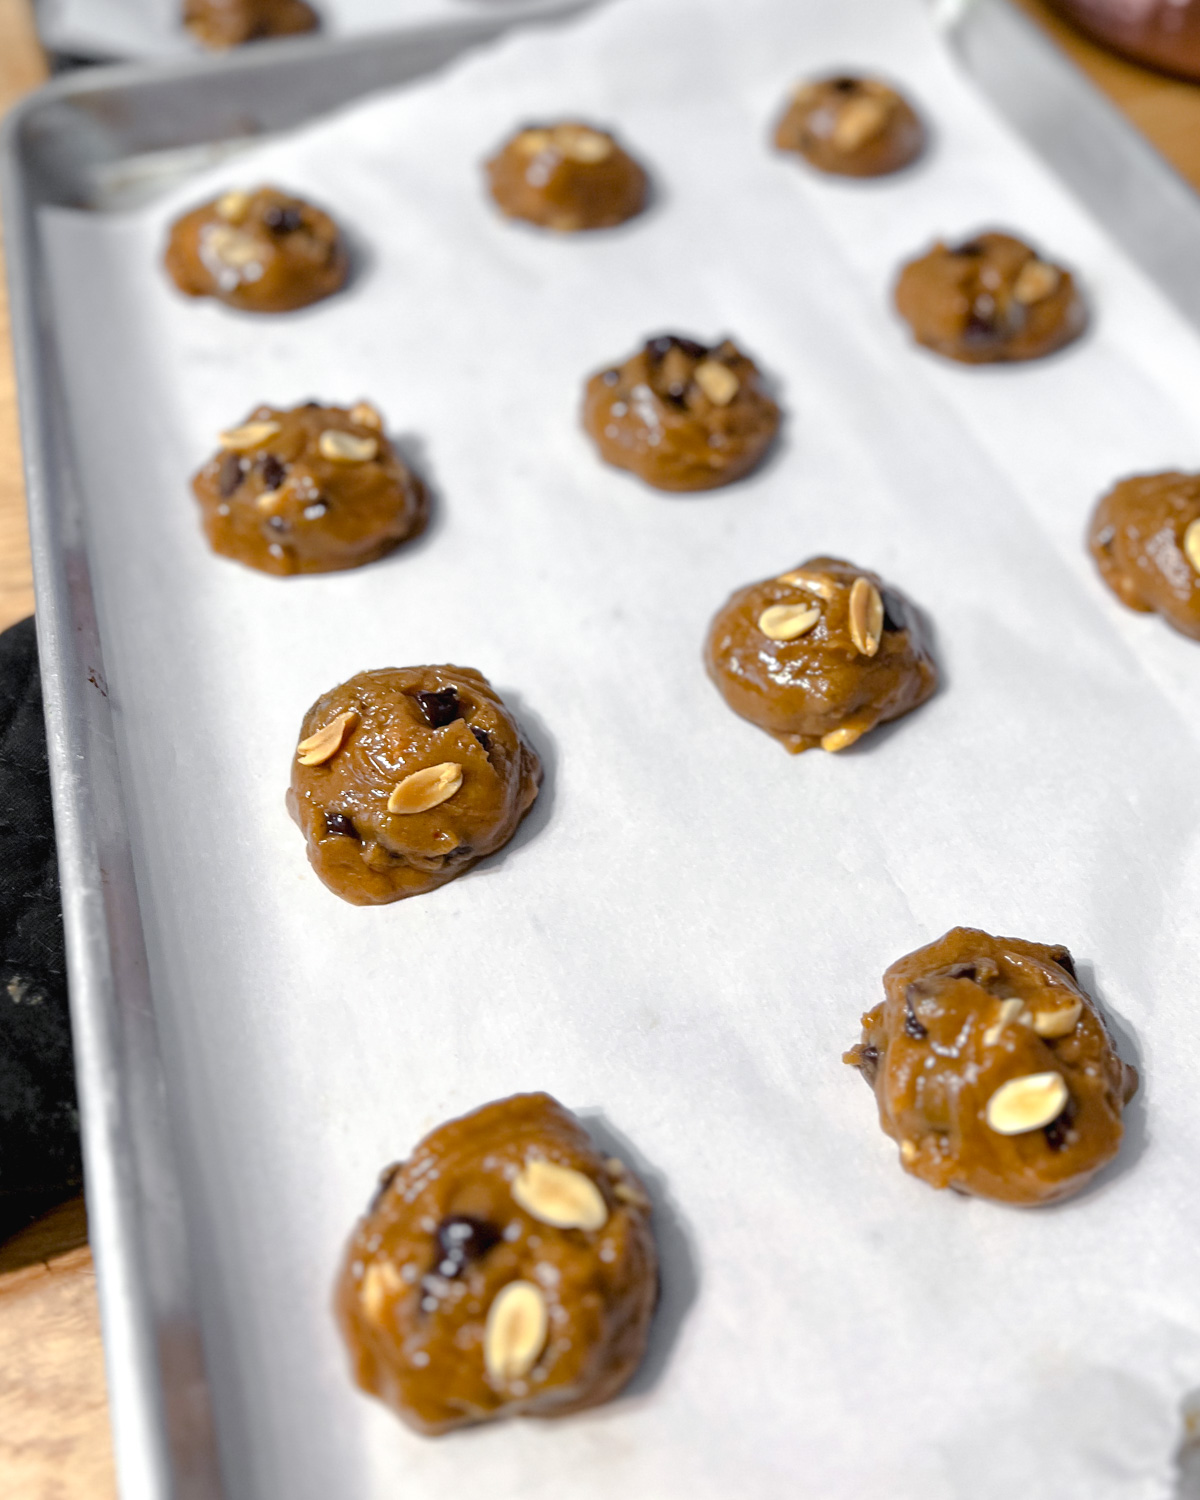 Raw vegan peanut butter chocolate chip cookies in a baking tray.